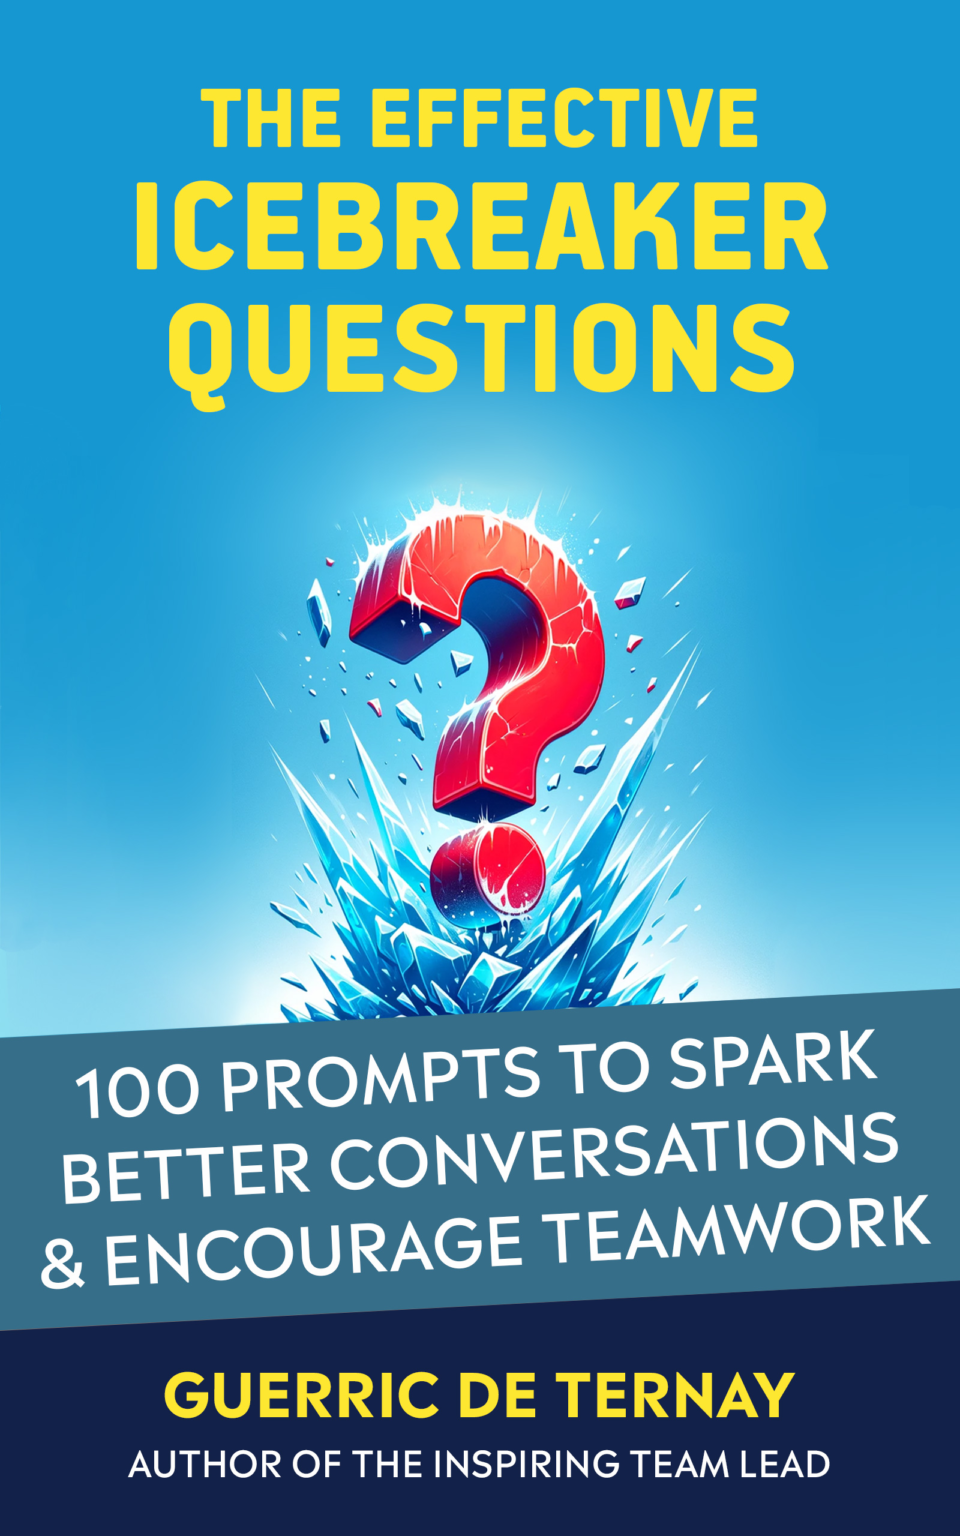 Book cover: The Engaging Icebreaker Questions